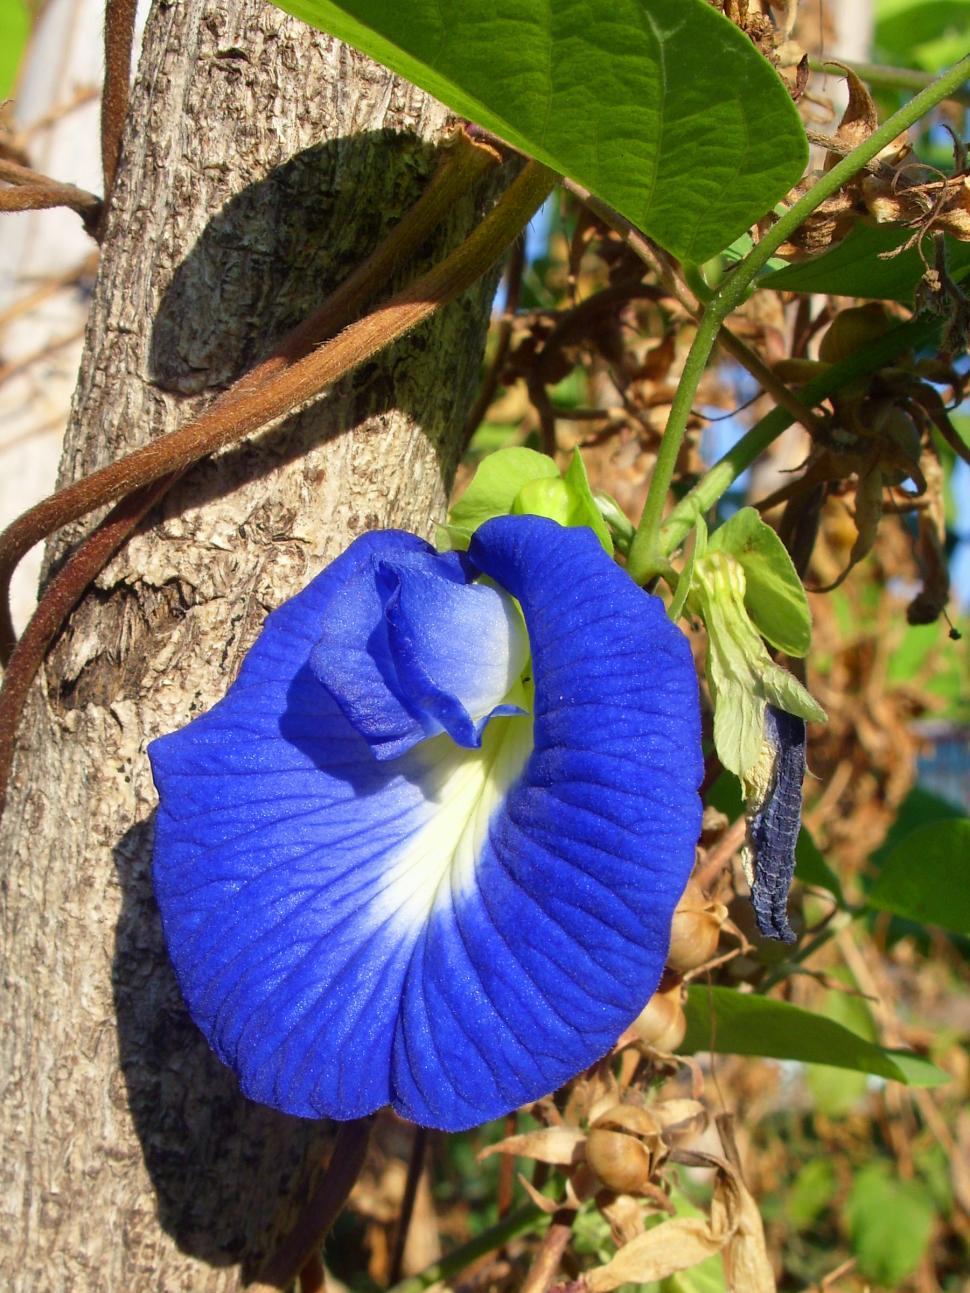 Free Image of Butterfly Pea Flower 